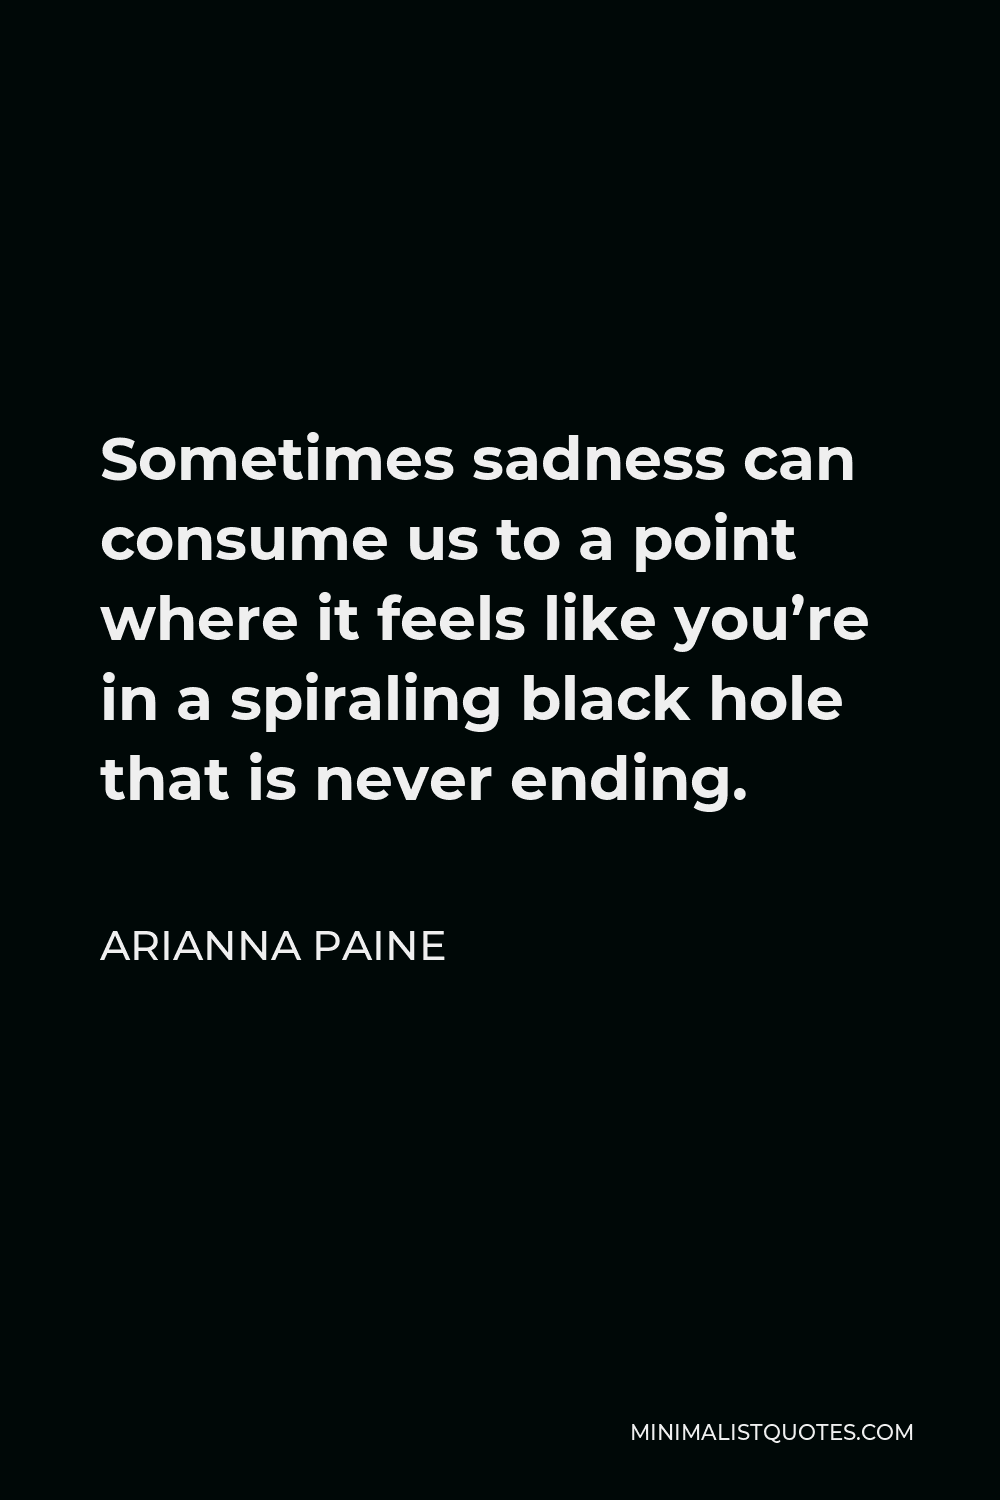 Arianna Paine Quote - Sometimes sadness can consume us to a point where it feels like you’re in a spiraling black hole that is never ending.